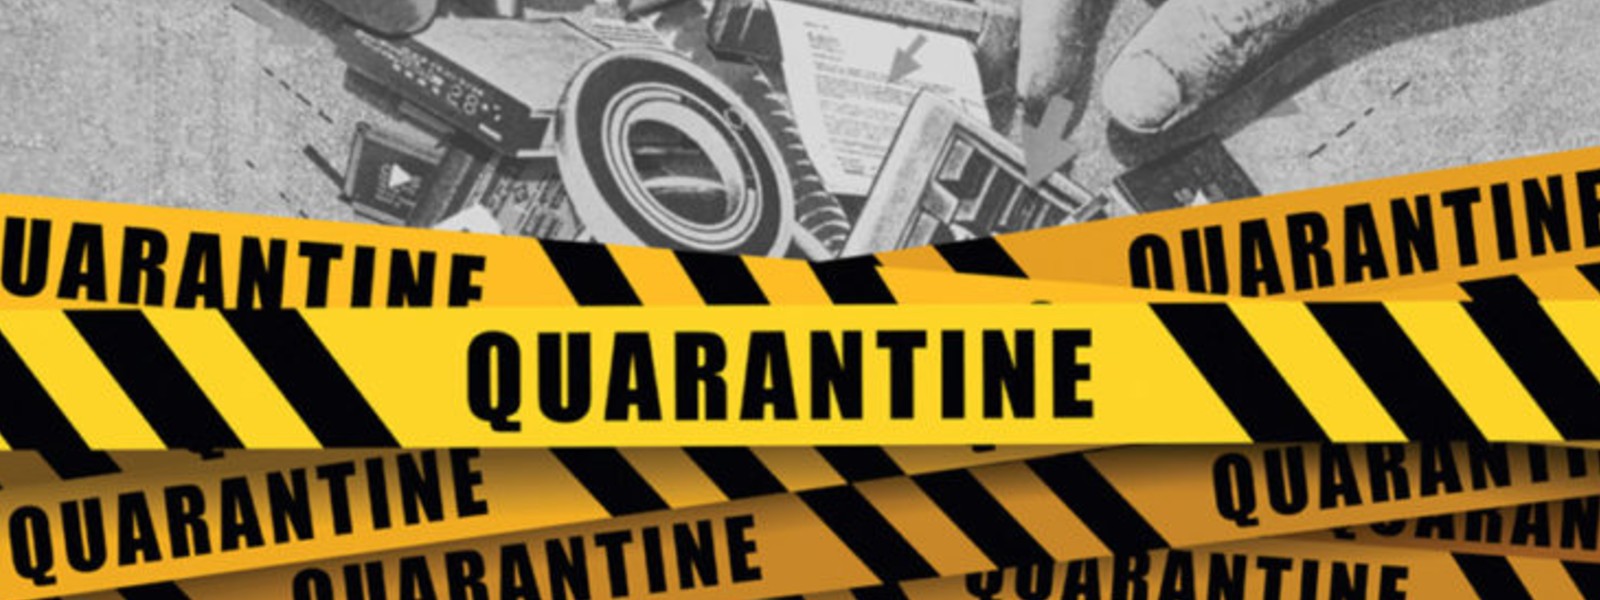 149 people to be released from quarantine today